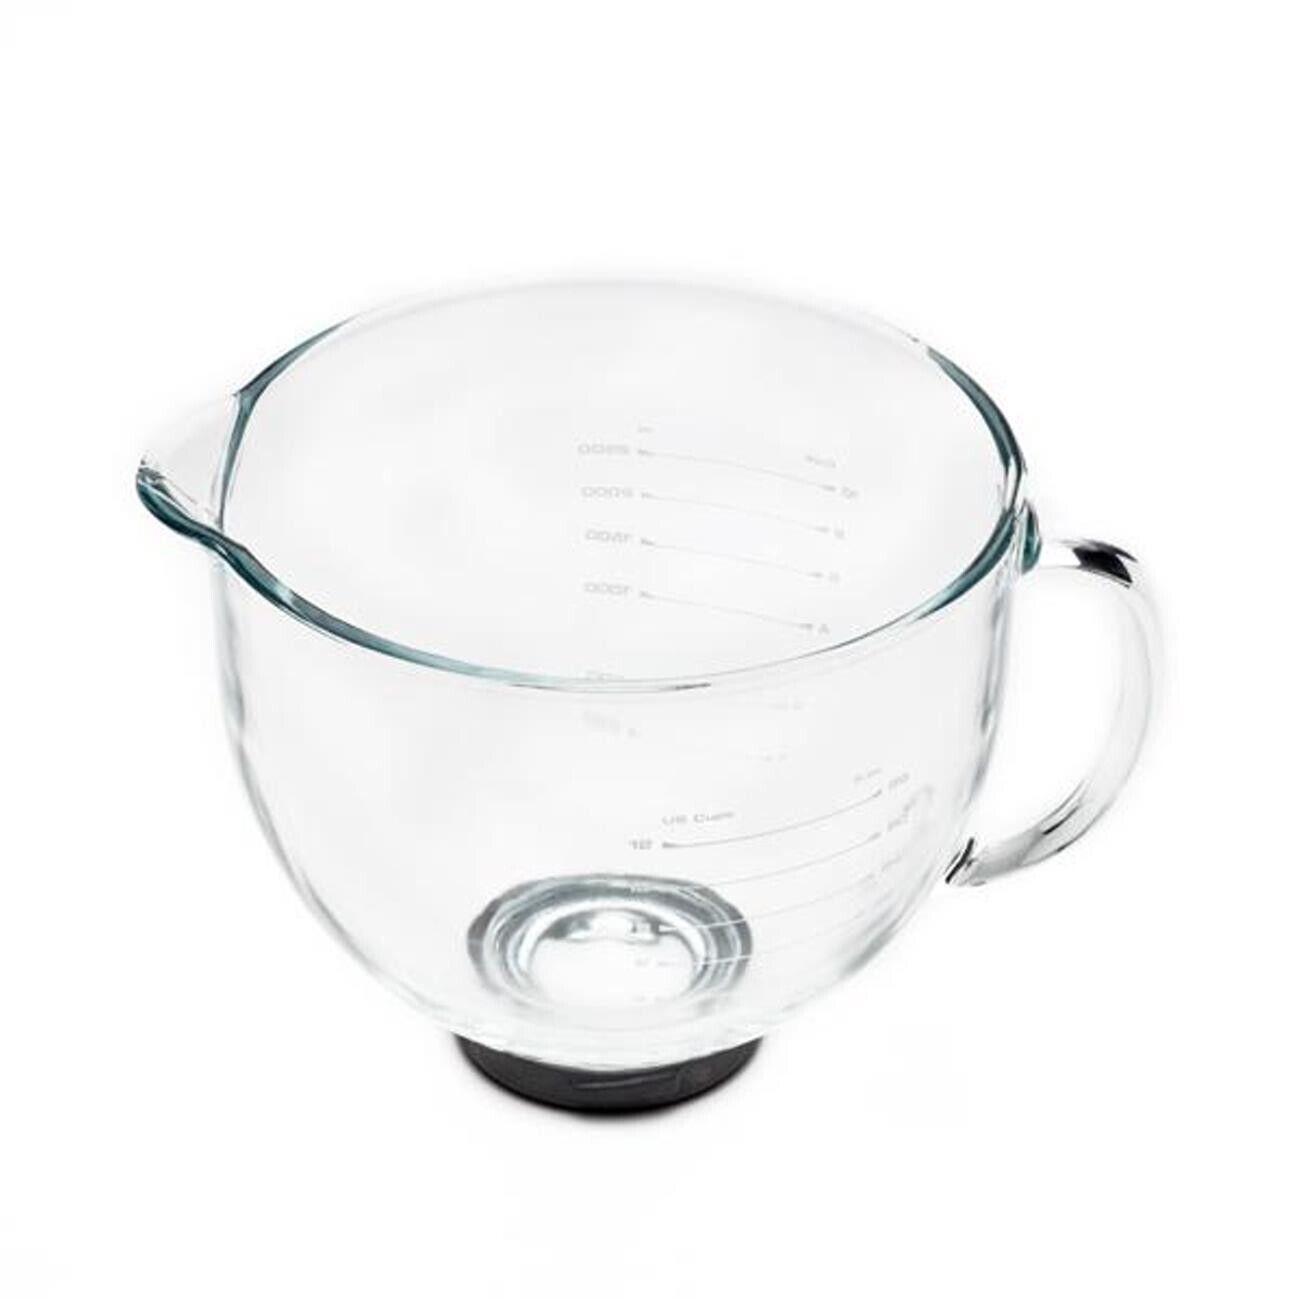 Genuine Breville Bowl Mixer for the Bakery Chef™